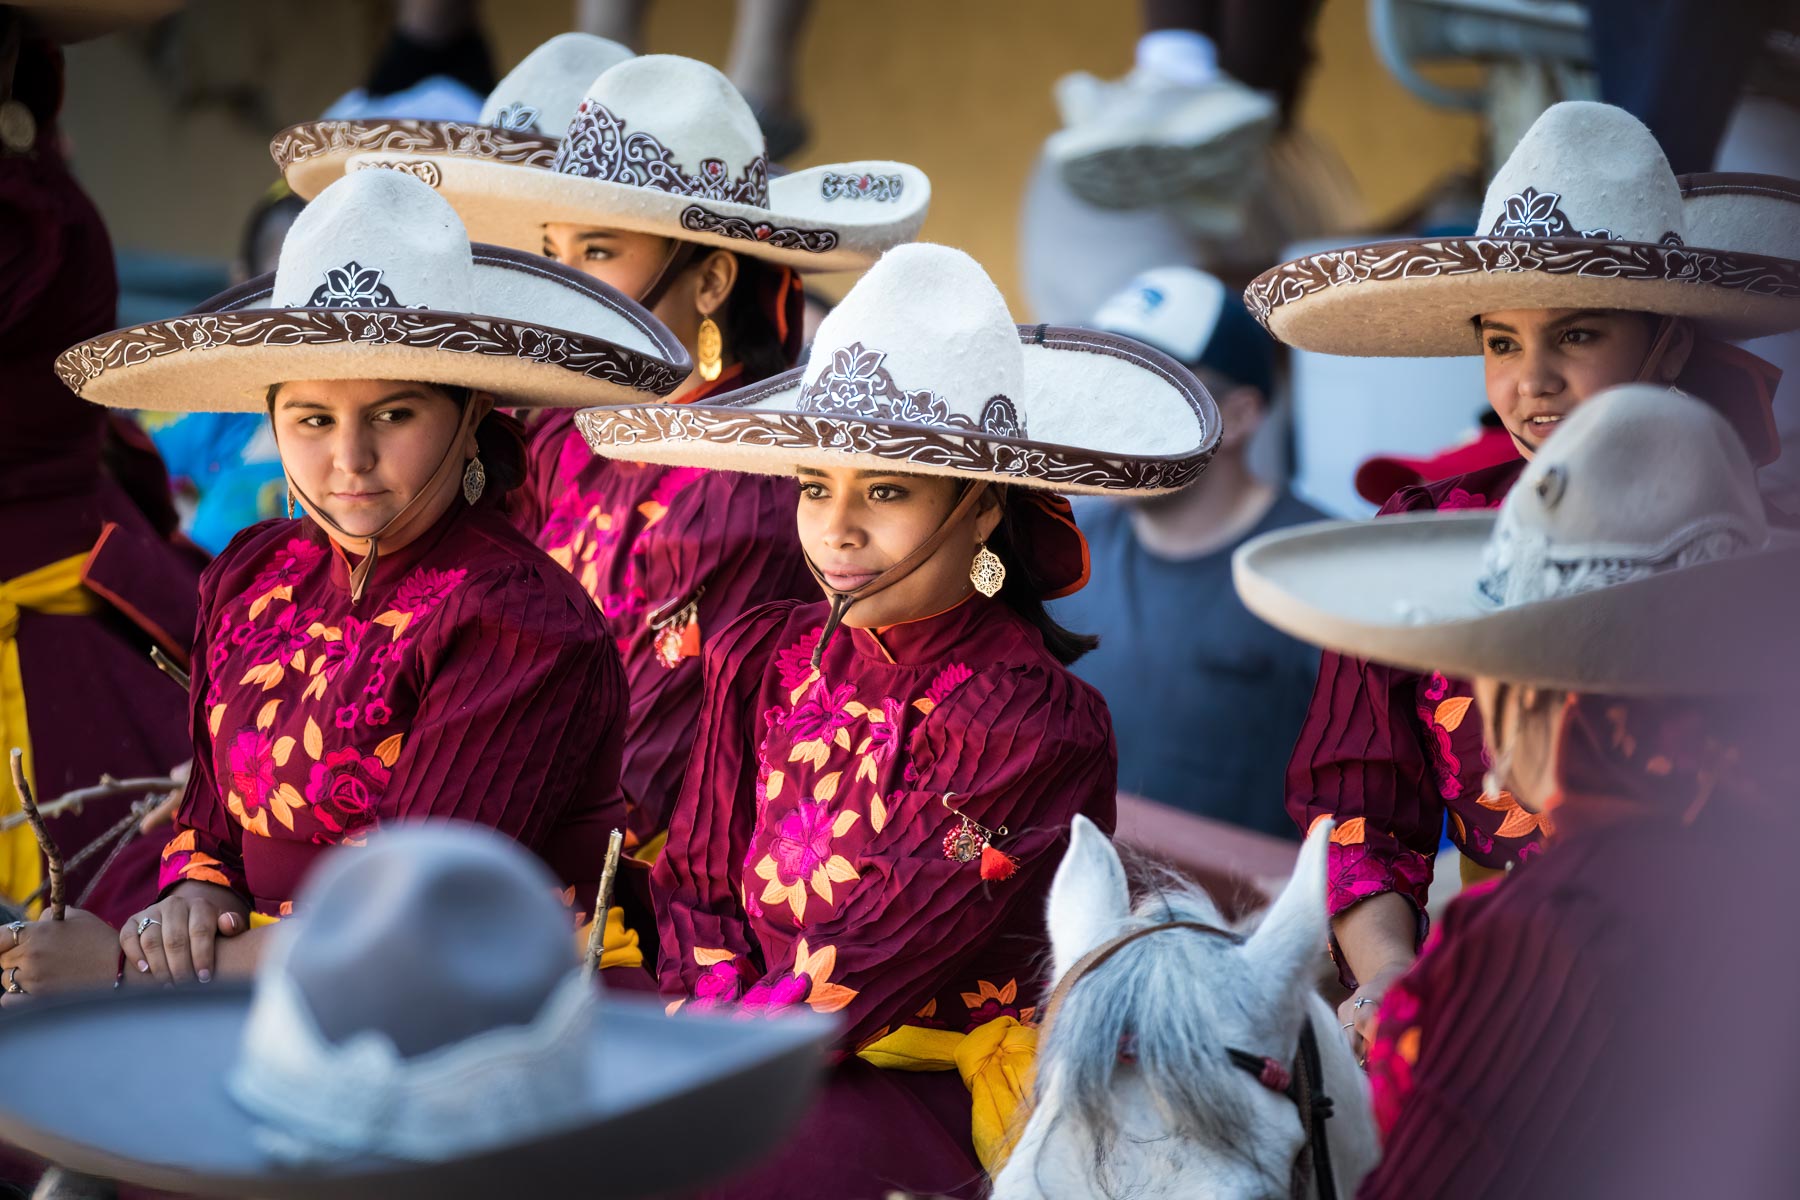 Female horseback riders wearing traditional cowboy hats during Day at Old Mexico for an article on the best Fiesta photos